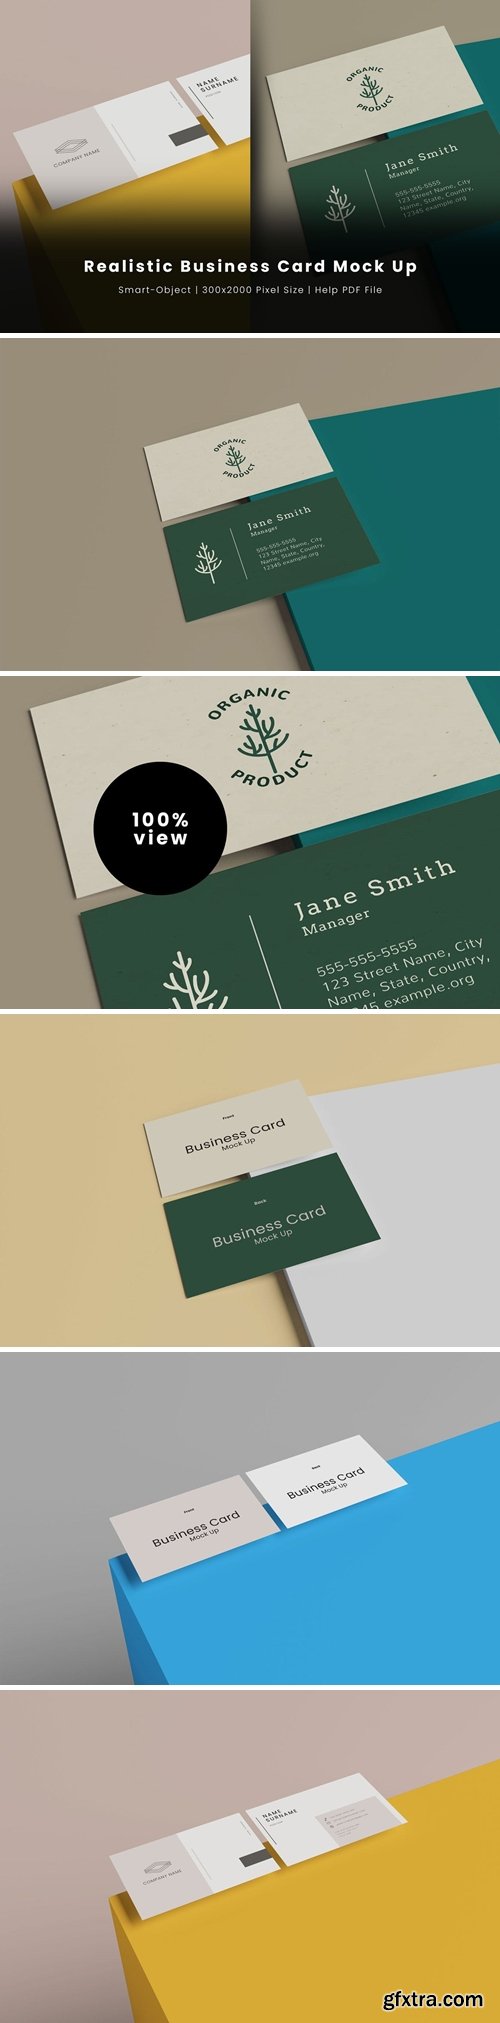 Realistic Business Card Mock Up